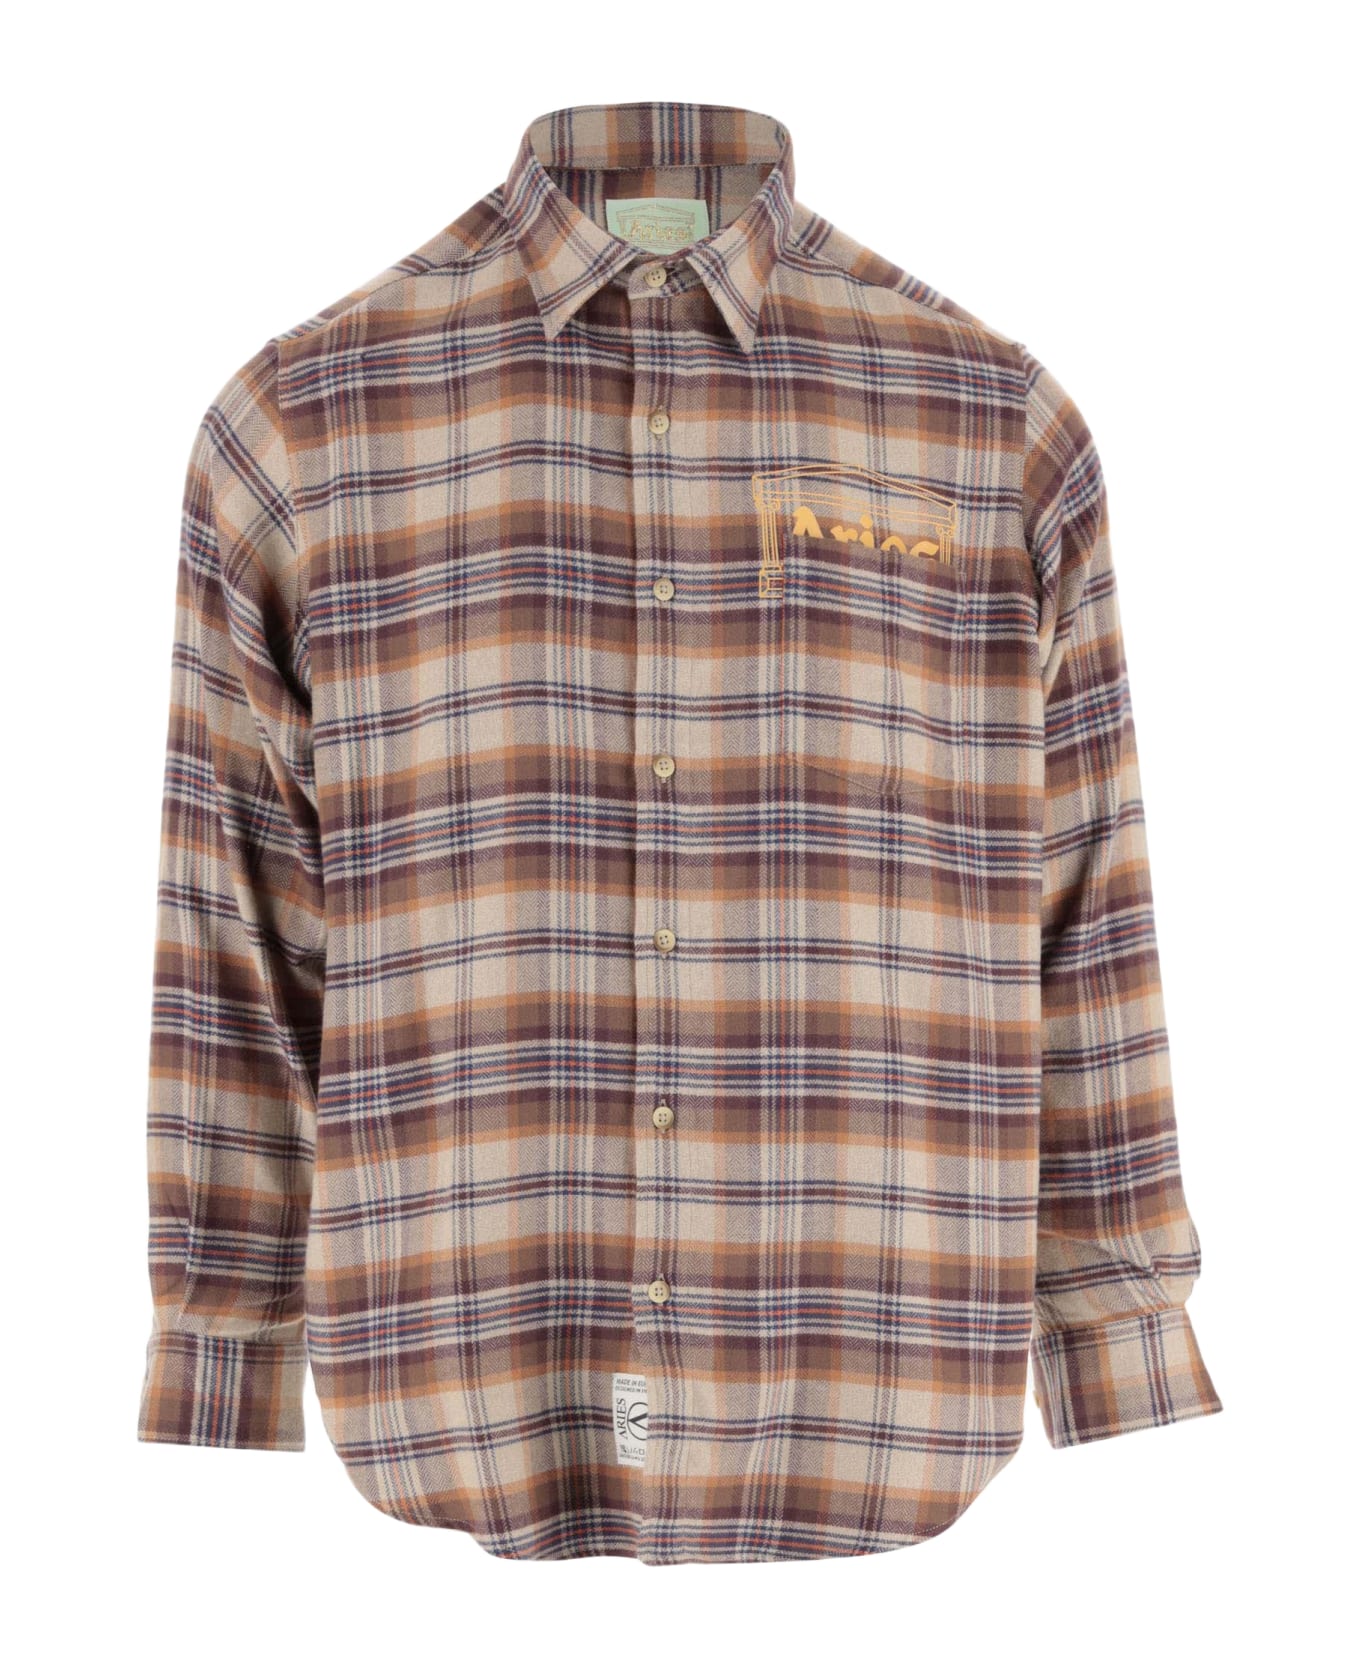 Aries Cotton Shirt With Check Pattern